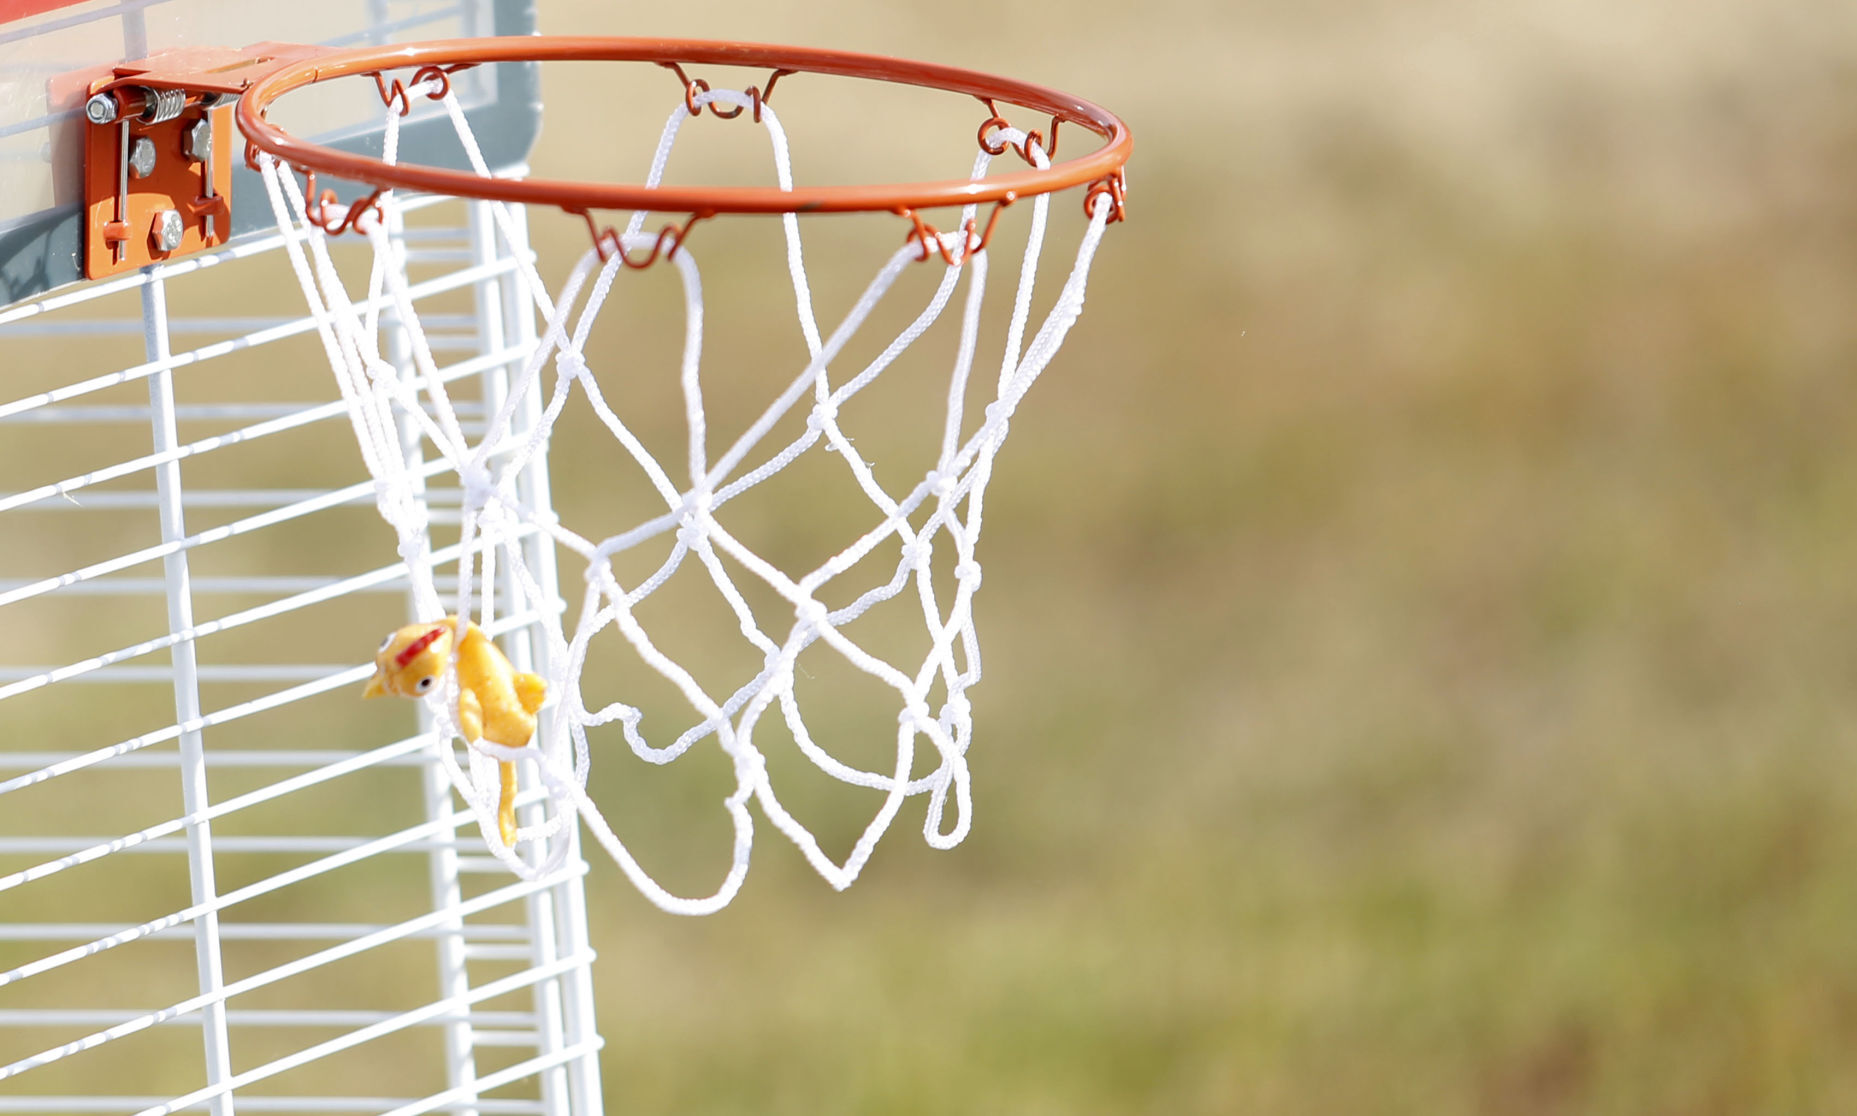 A rubber chicken hangs in a basketball net during one of the games at the Area Residential Care Corporate and Community game night at the Port of Dubuque on Friday, June 11, 2021.    PHOTO CREDIT: Katie Goodale